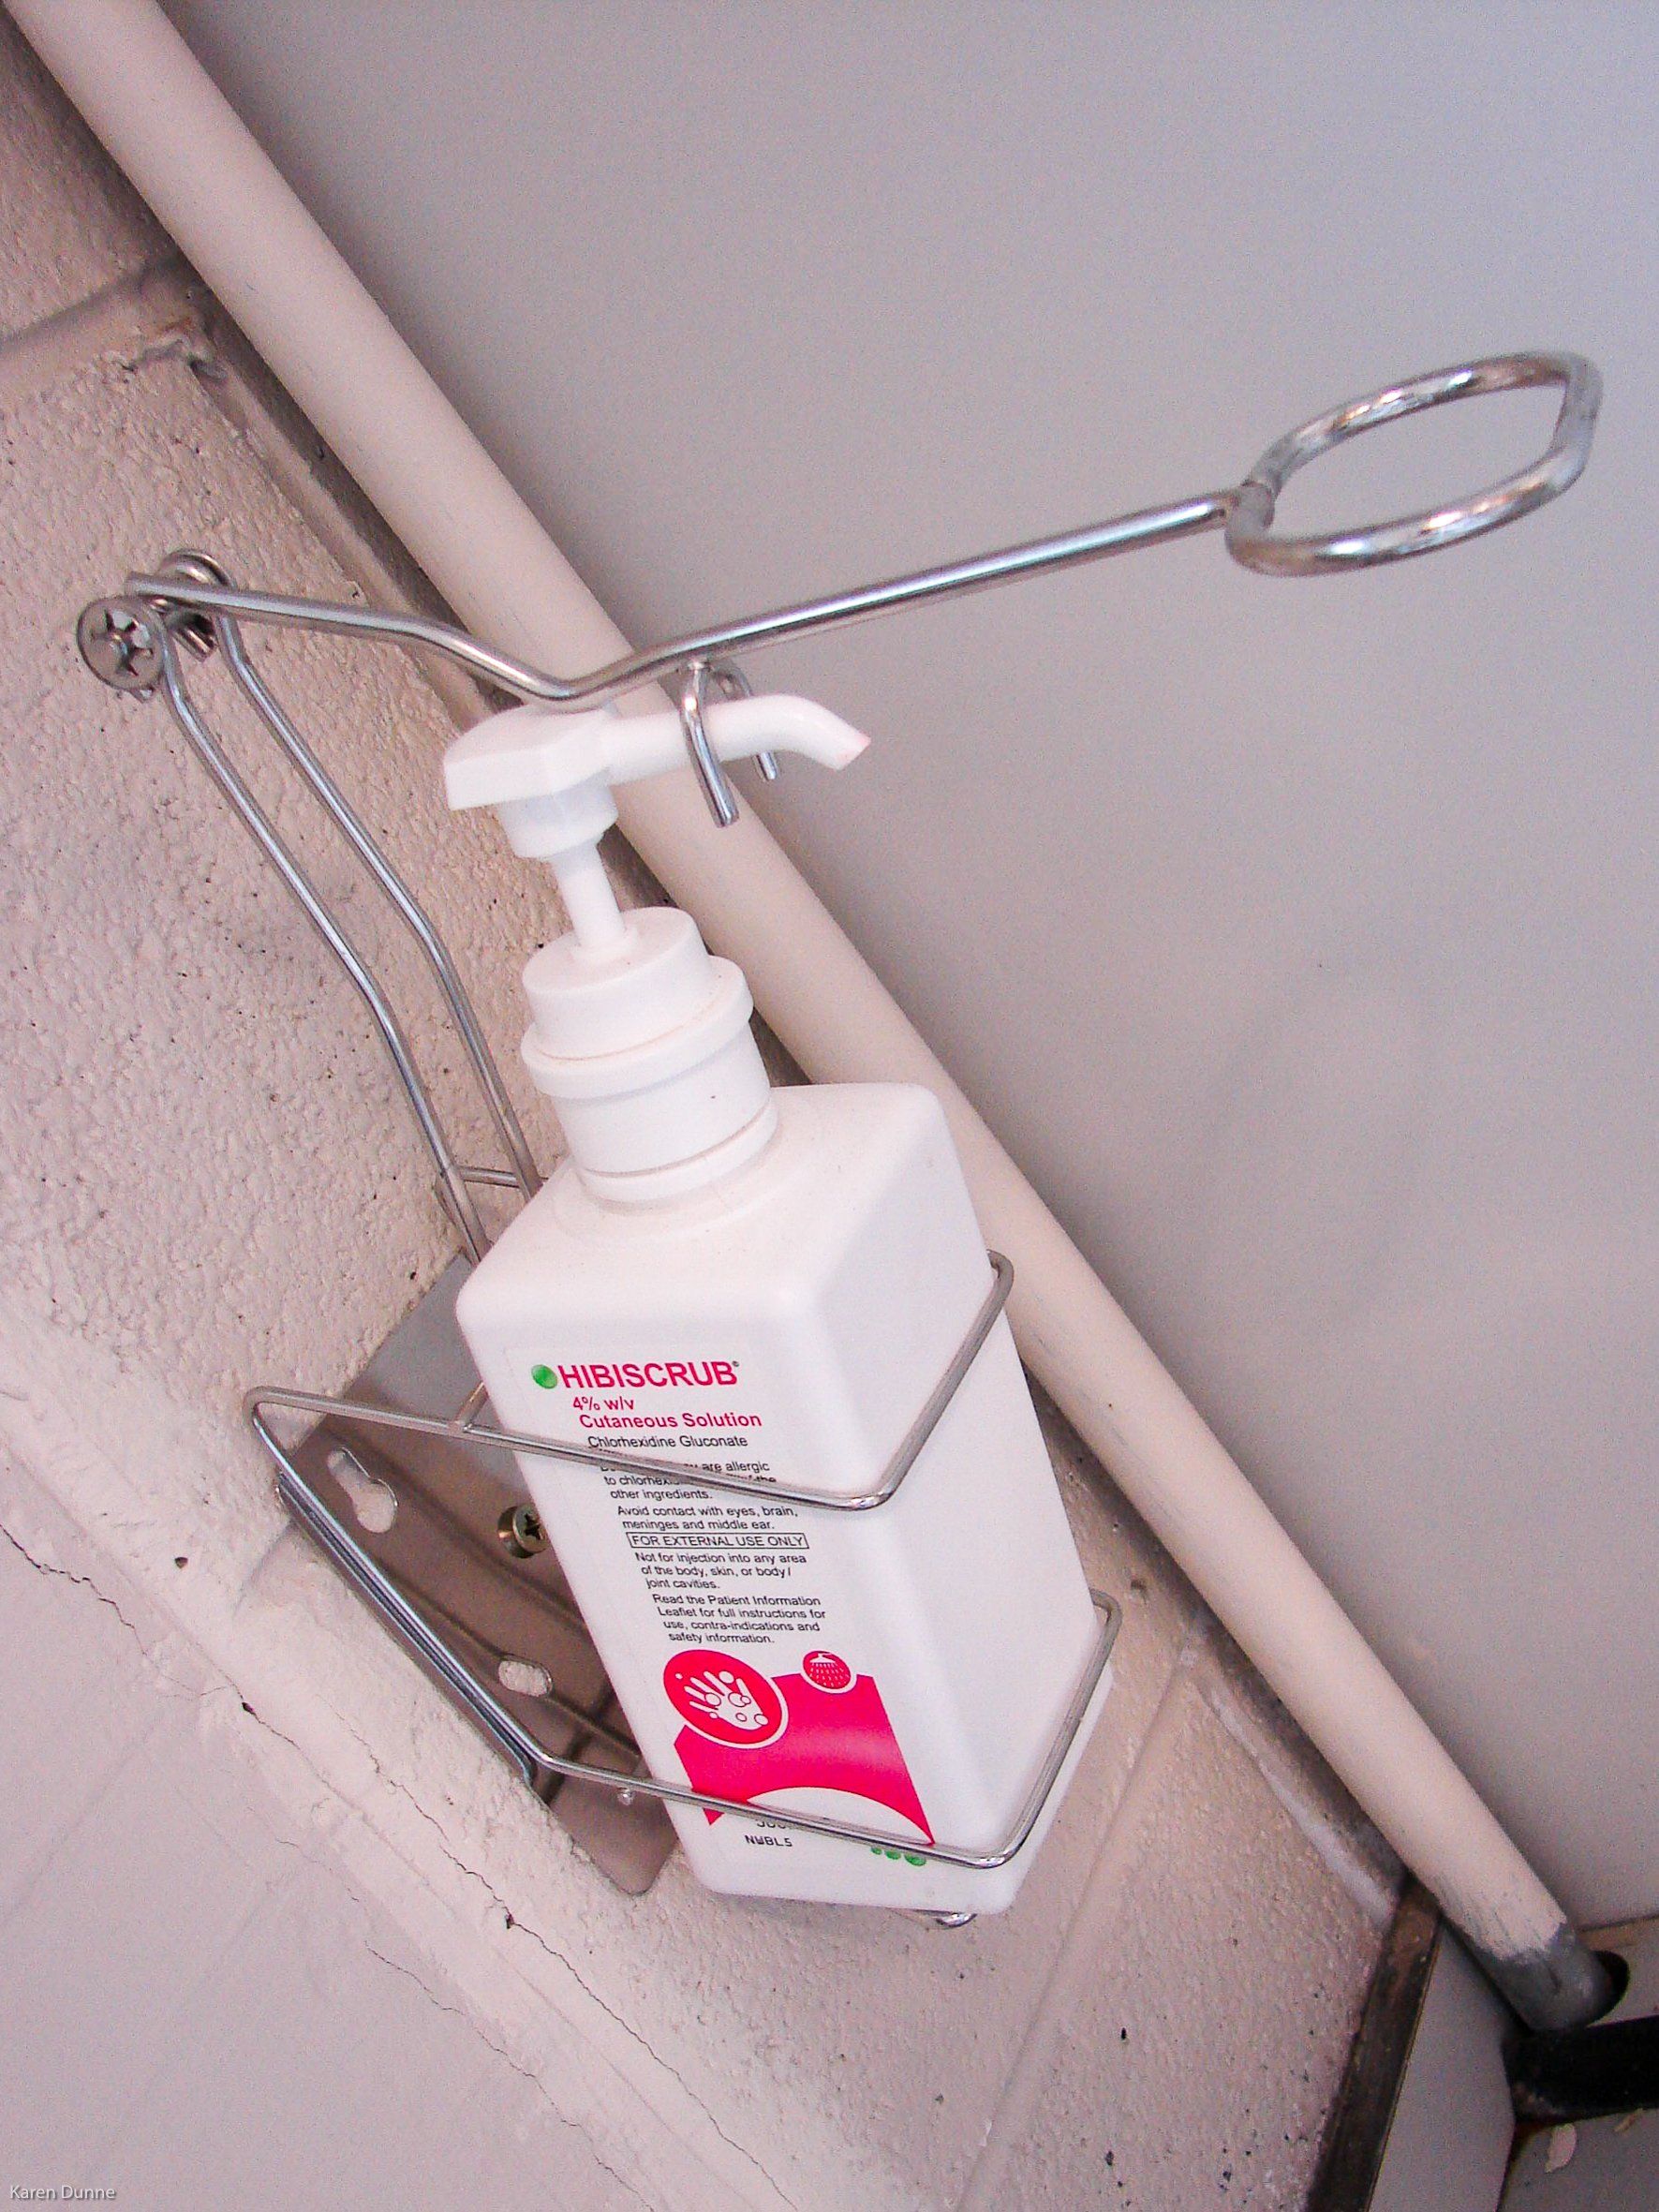 Elbow-operated soap dispenser